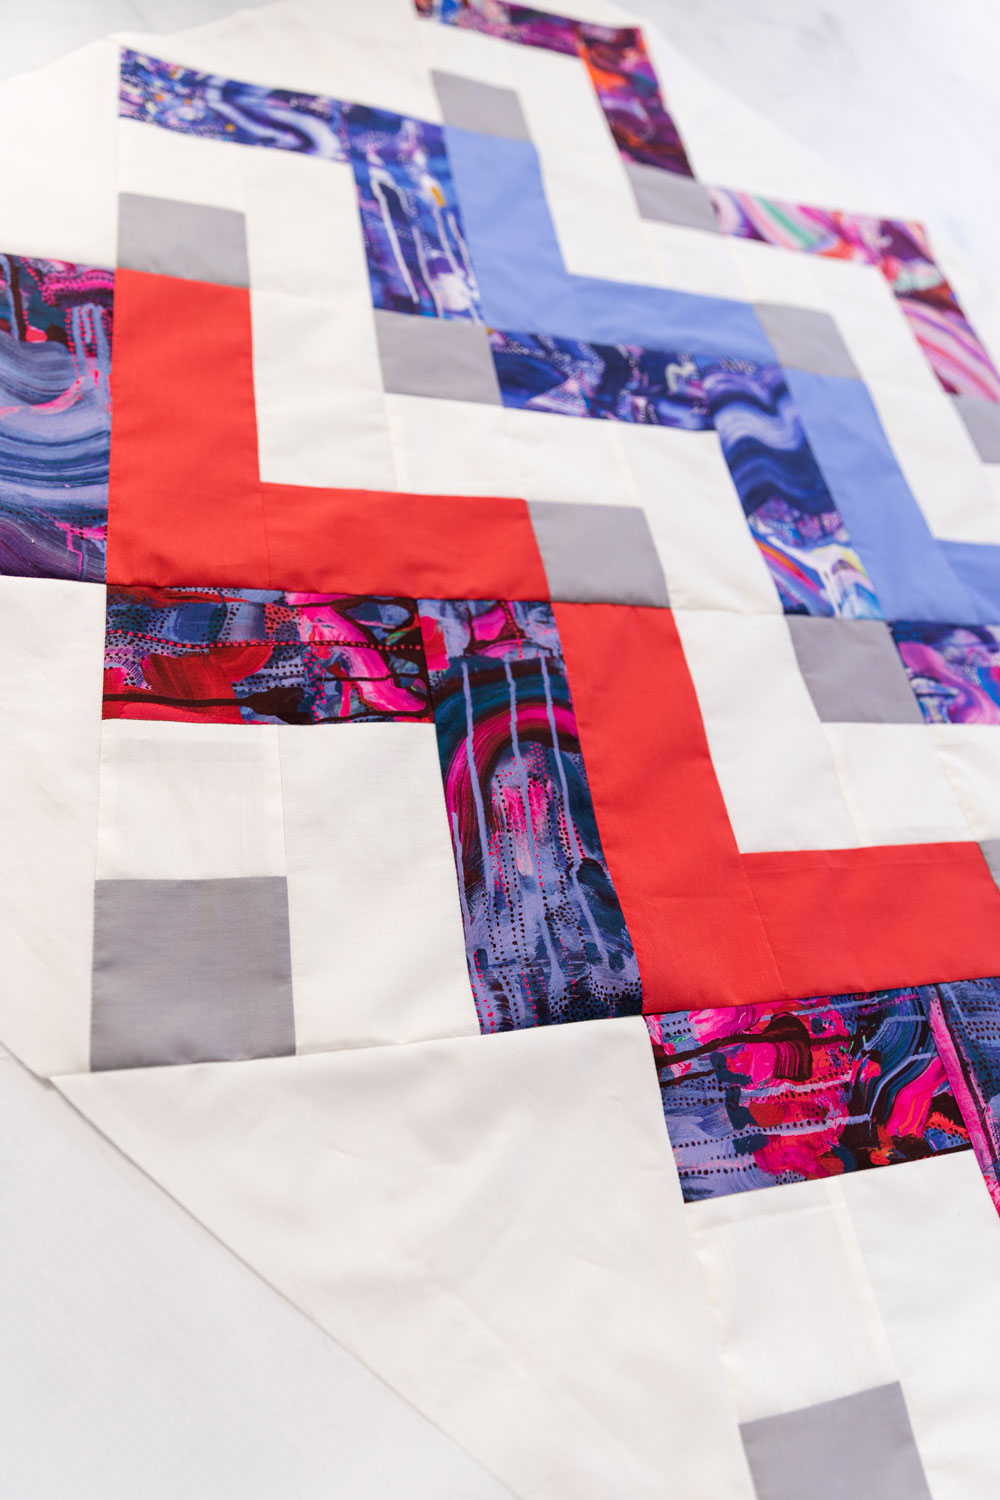 Thrive is a fat-quarter friendly modern quilt pattern using Liberty of London fabric. This instant PDF download comes in king, queen/full, twin, throw and baby quilt sizes. suzyquilts.com